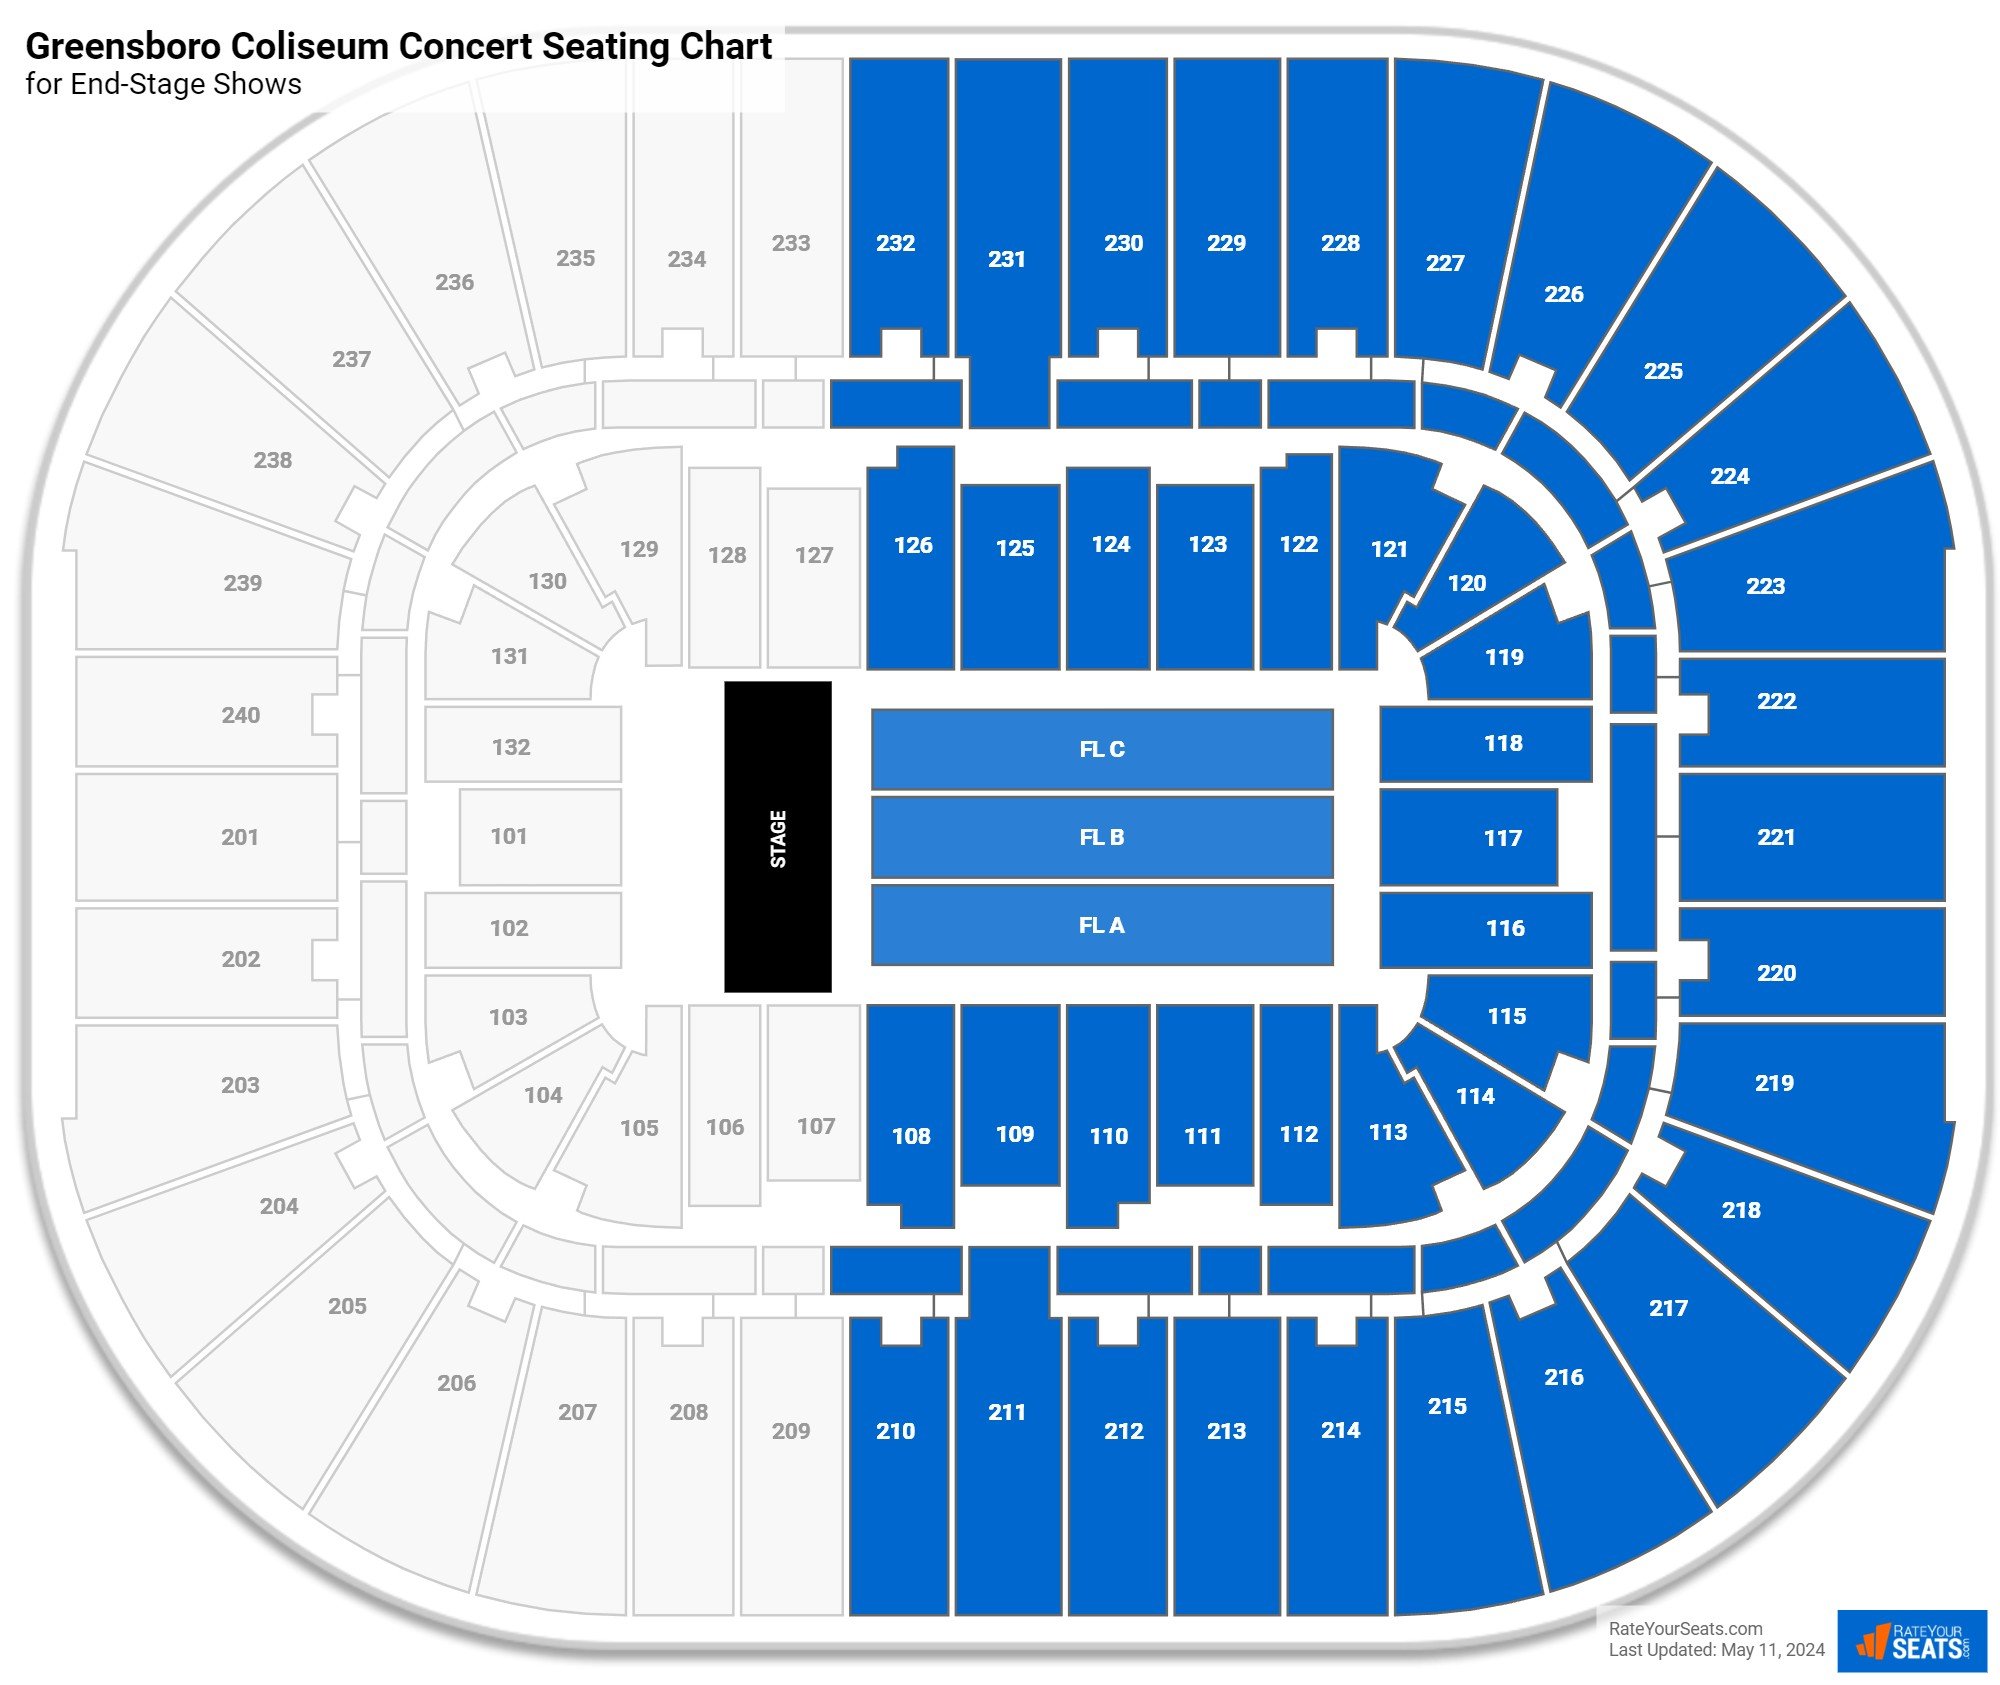 https://www.rateyourseats.com/assets/images/seating_charts/static/greensboro-coliseum-concert-seating-chart-for-end-stage-shows.jpg